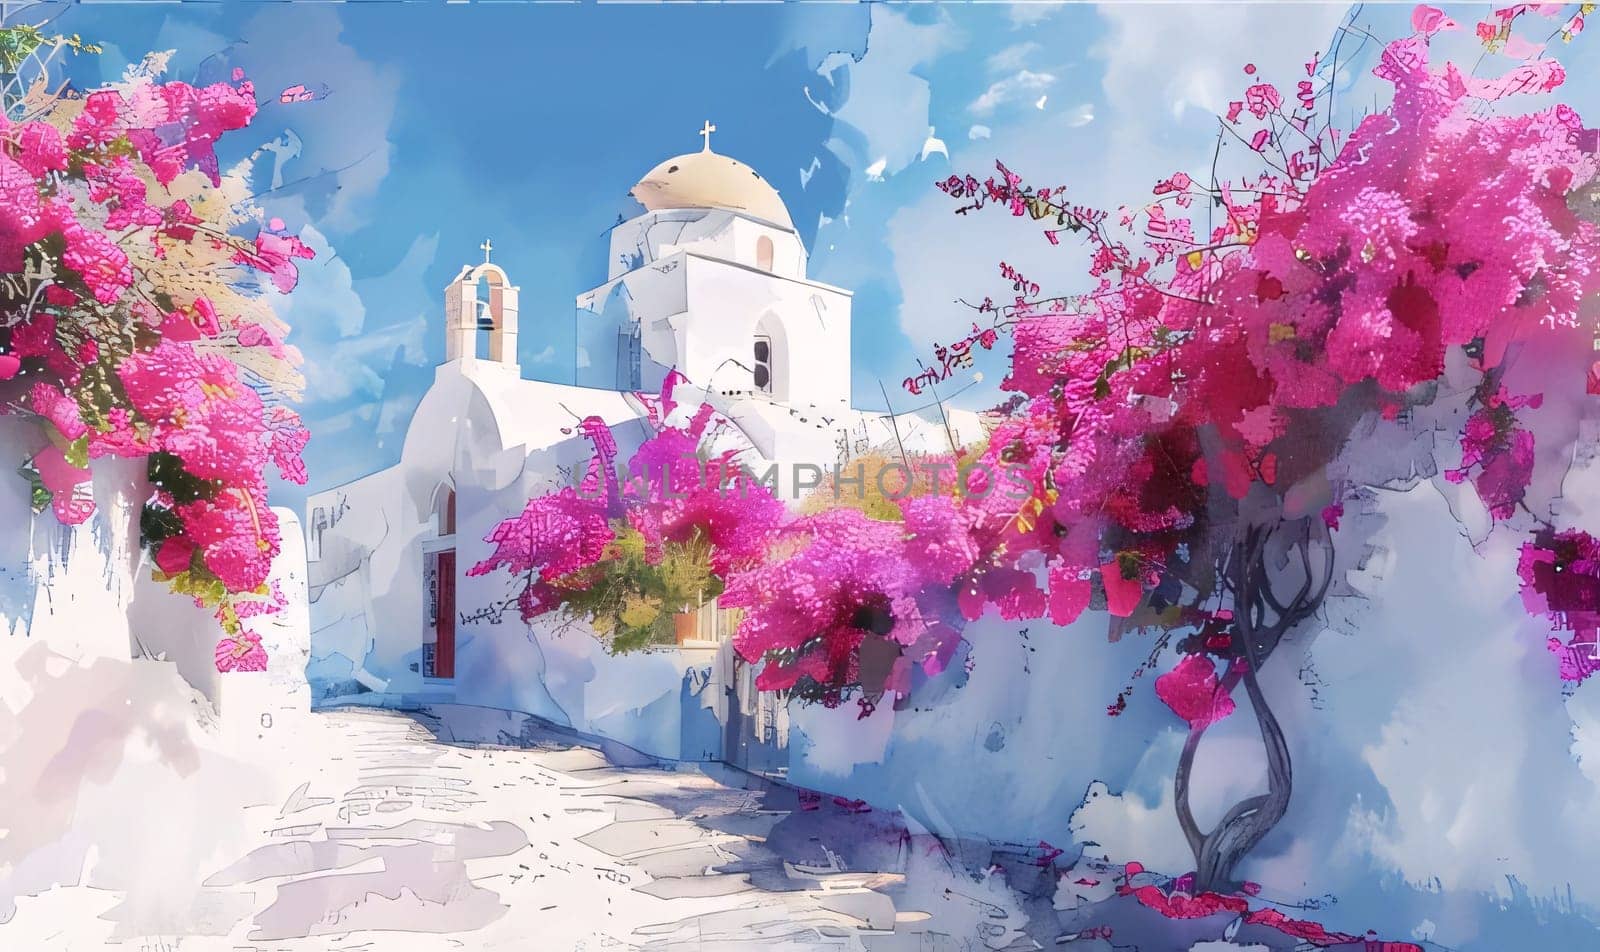 Greece, white walls of the house, decorations of pink flowers. Flowering flowers, a symbol of spring, new life. A joyful time of nature awakening to life.